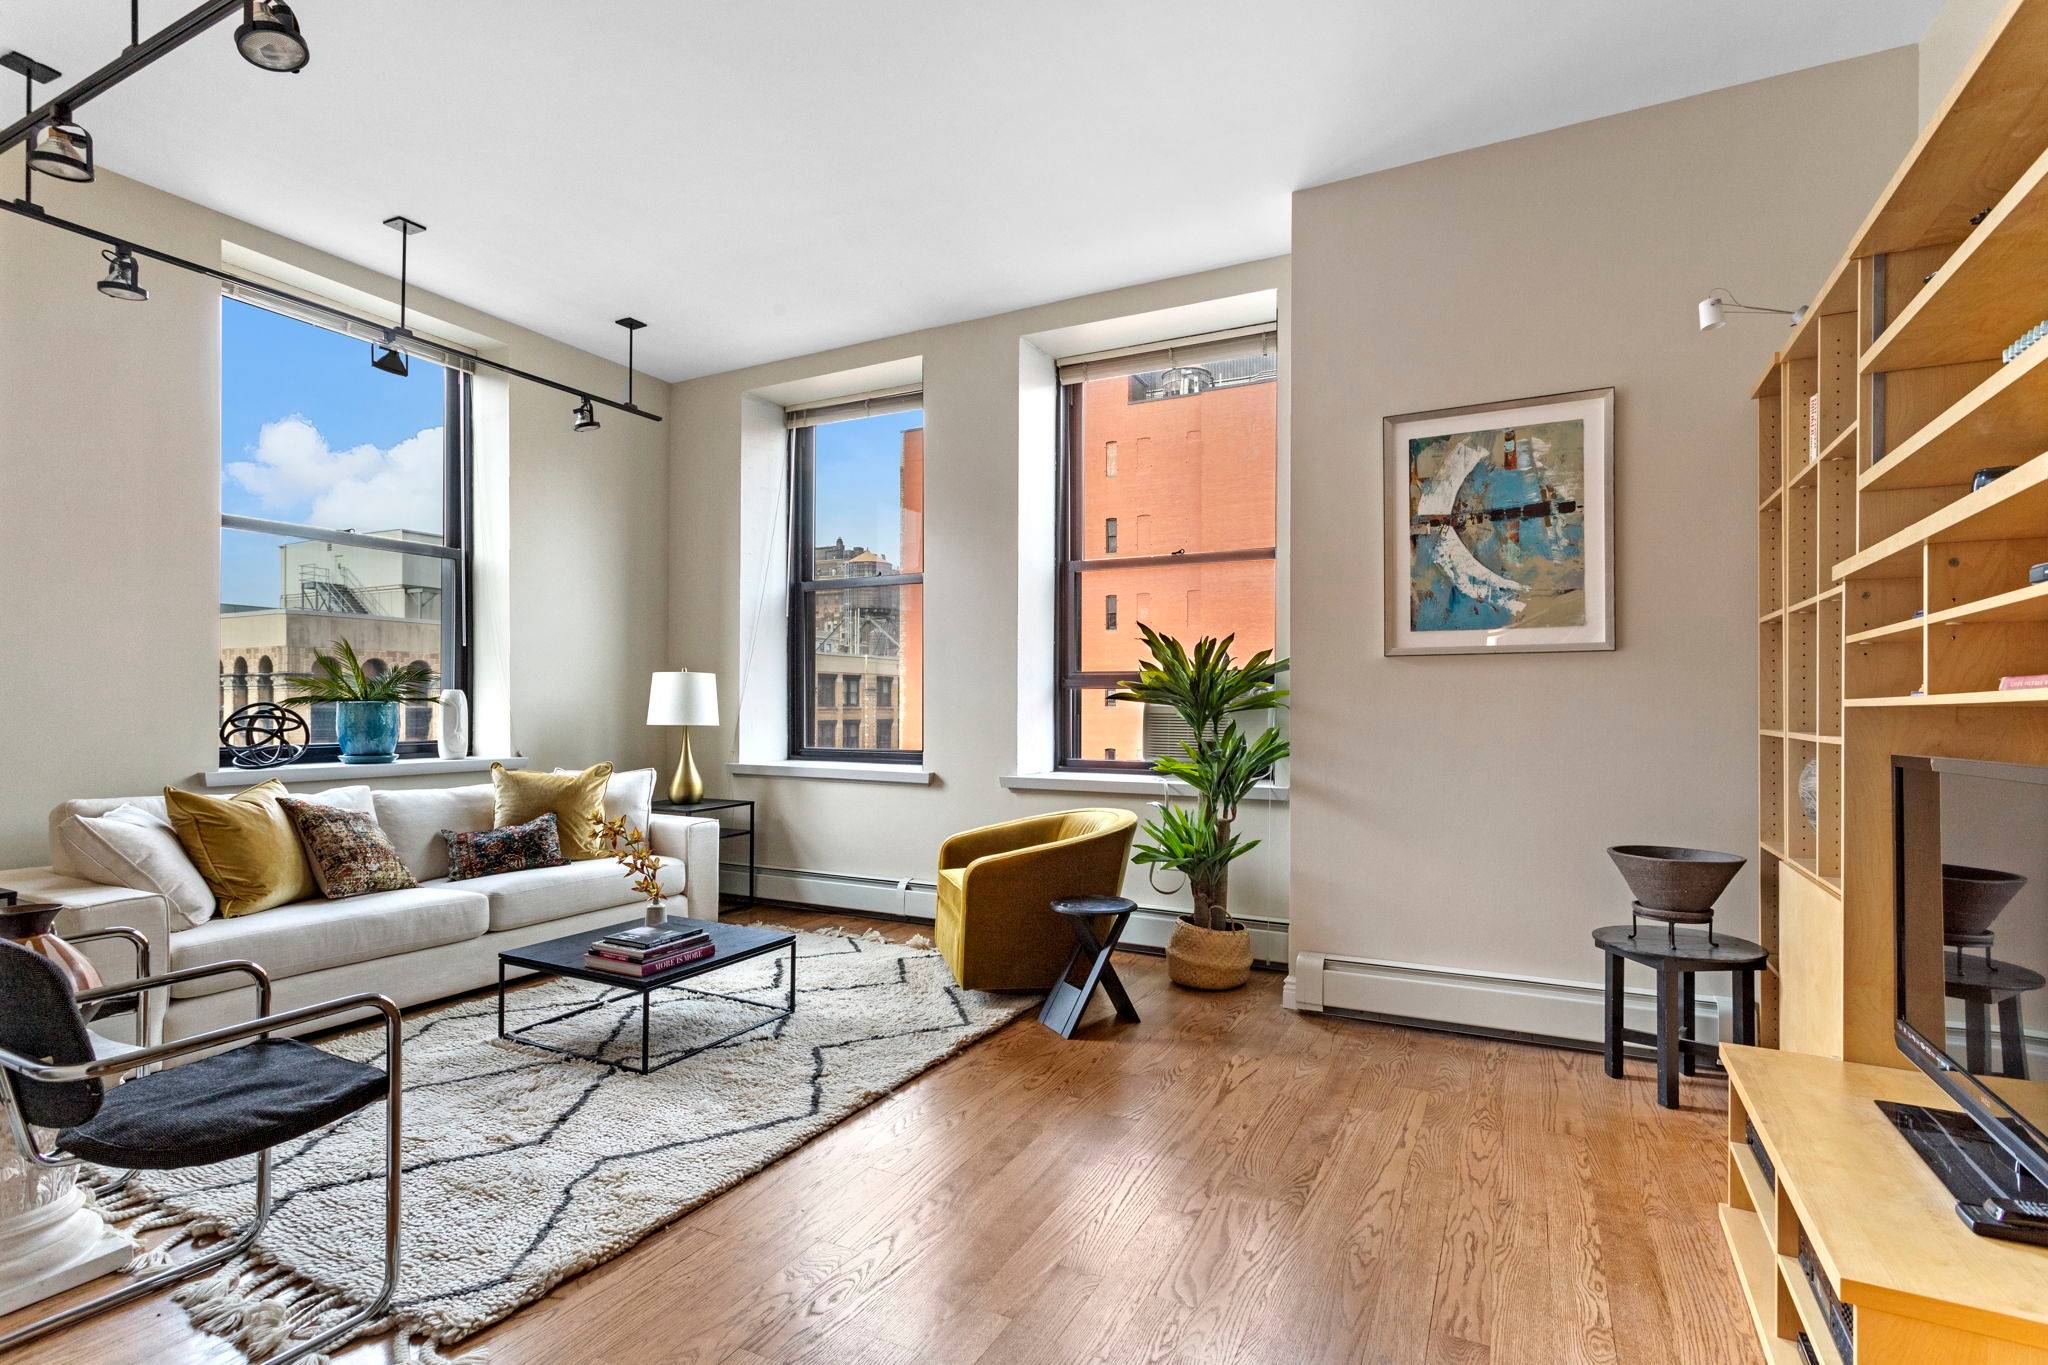 Move right into this bright and renovated one bedroom loft in the highly desirable neighborhood of Greenwich Village.